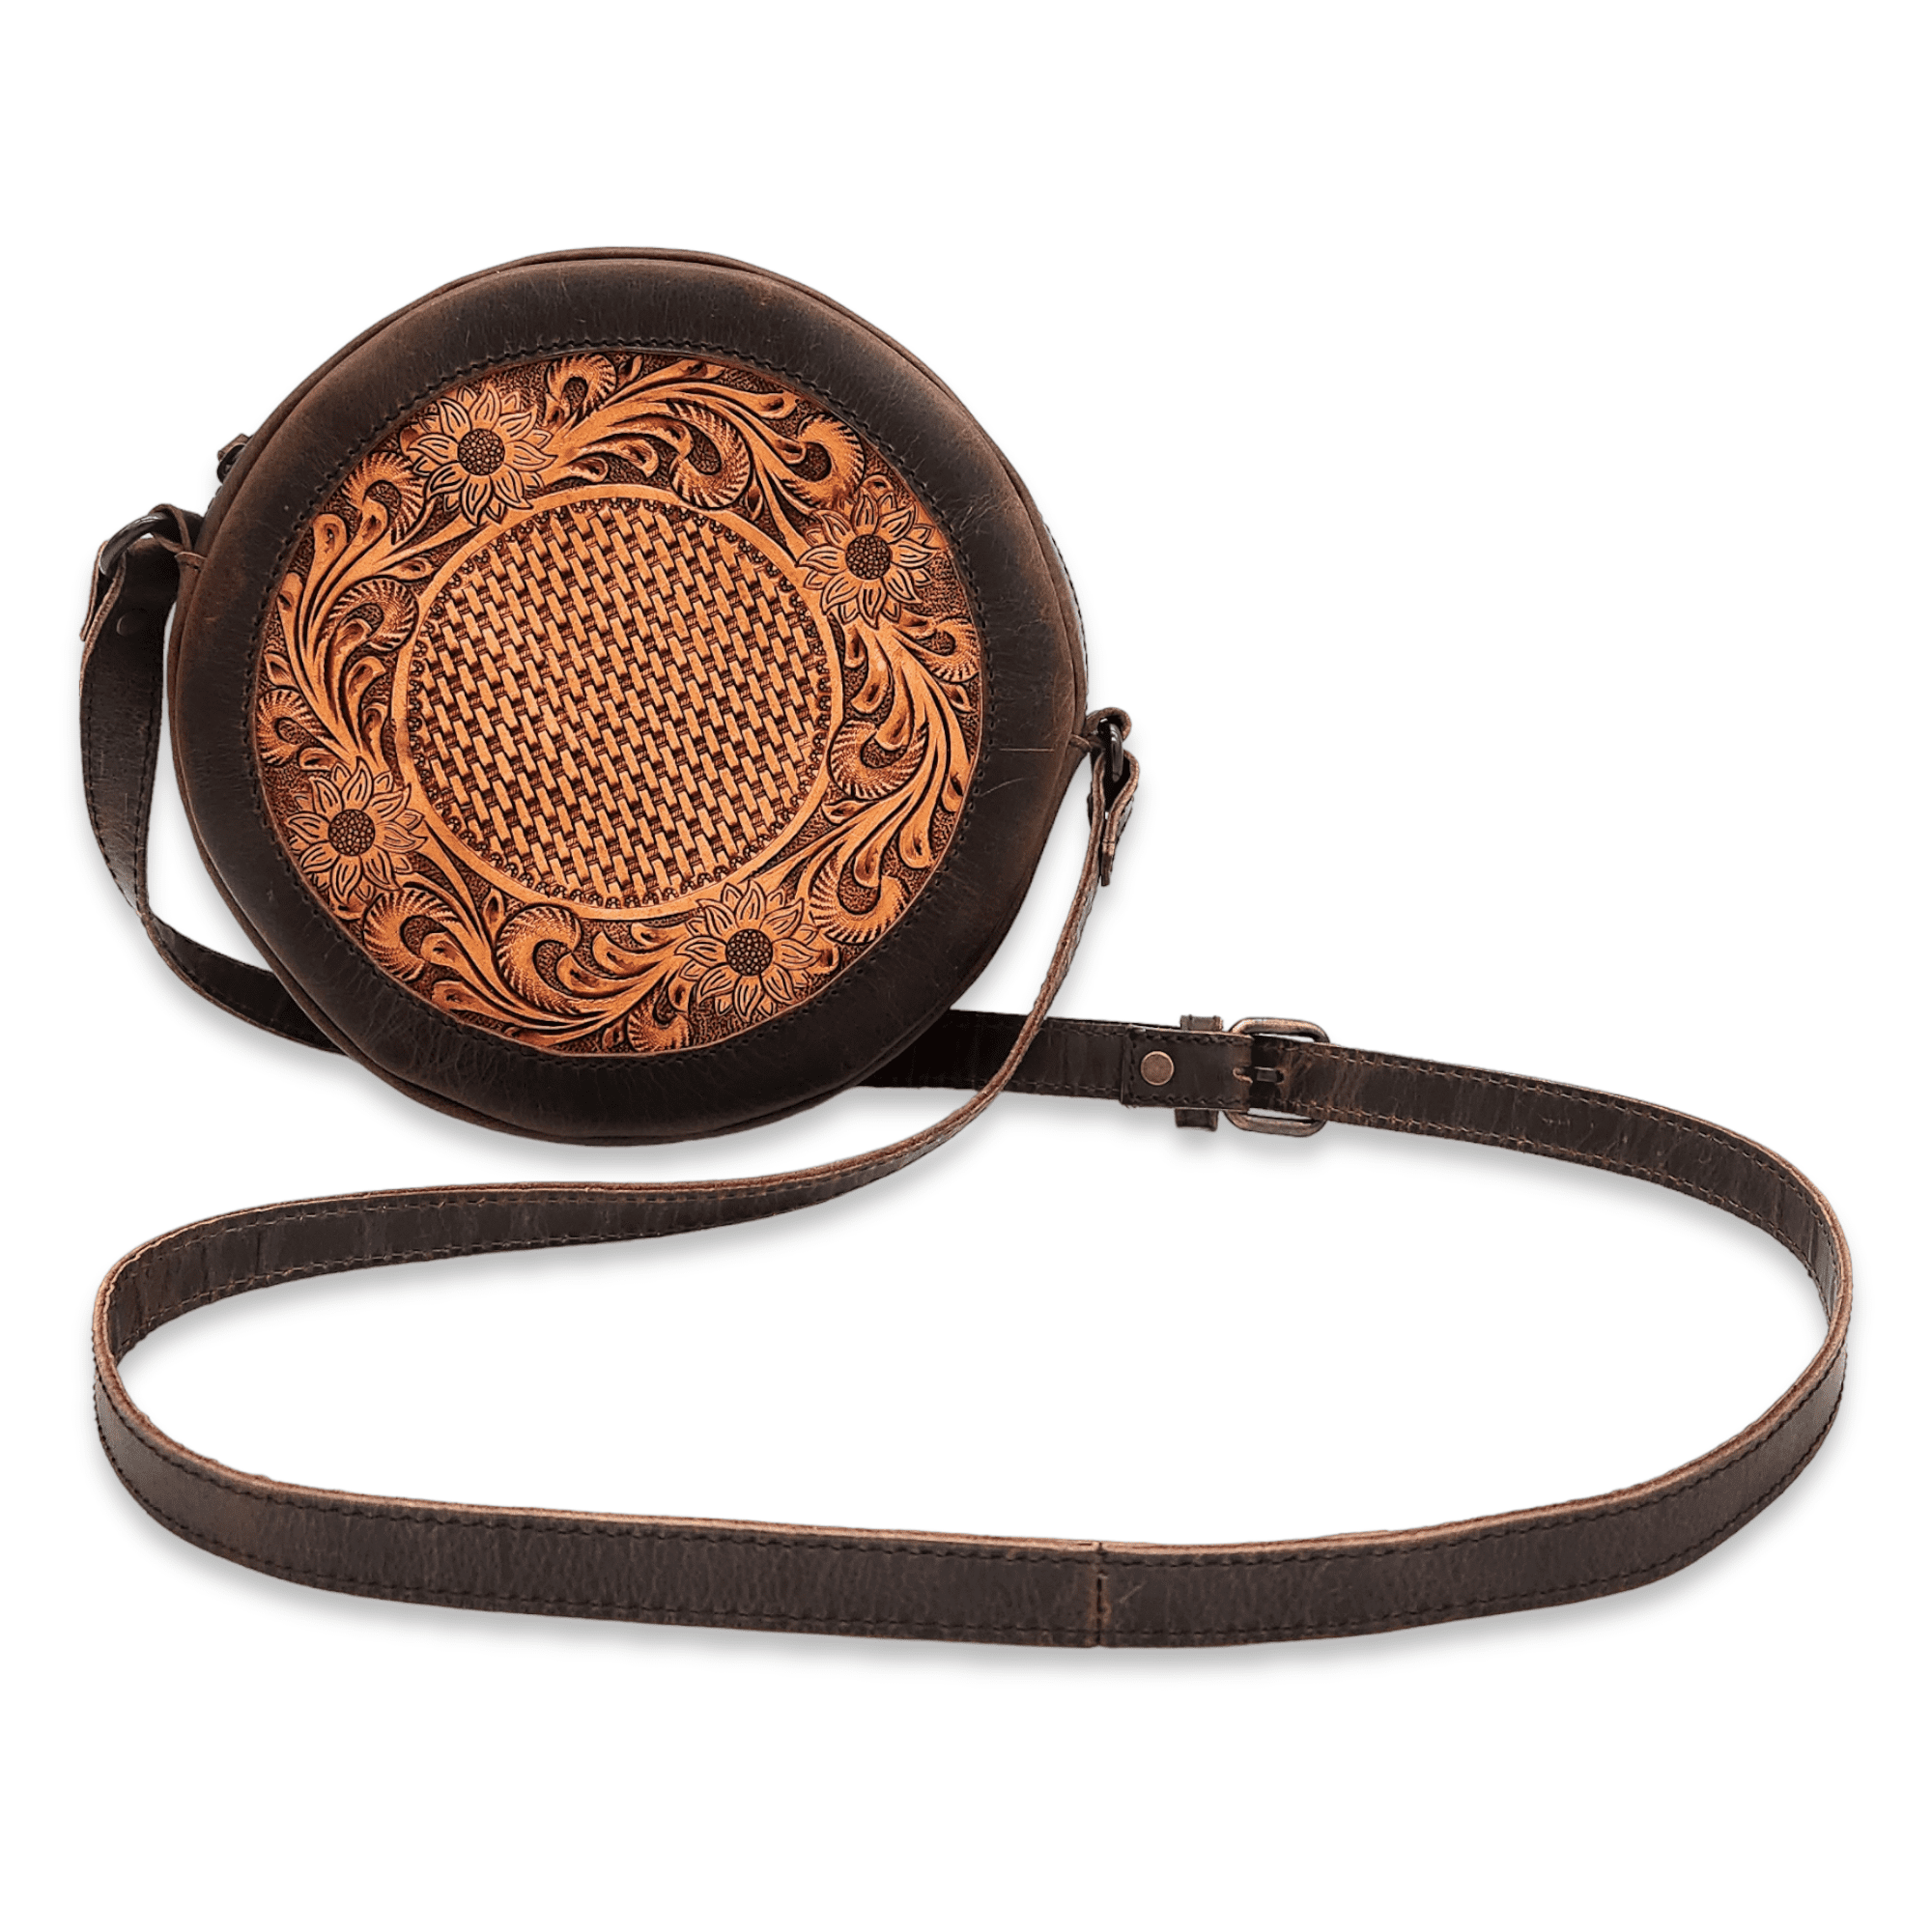 The Rancho Canteen Burnished Tan Hand-Tooled Leather Crossbody Luggage & BagsRanch Junkie